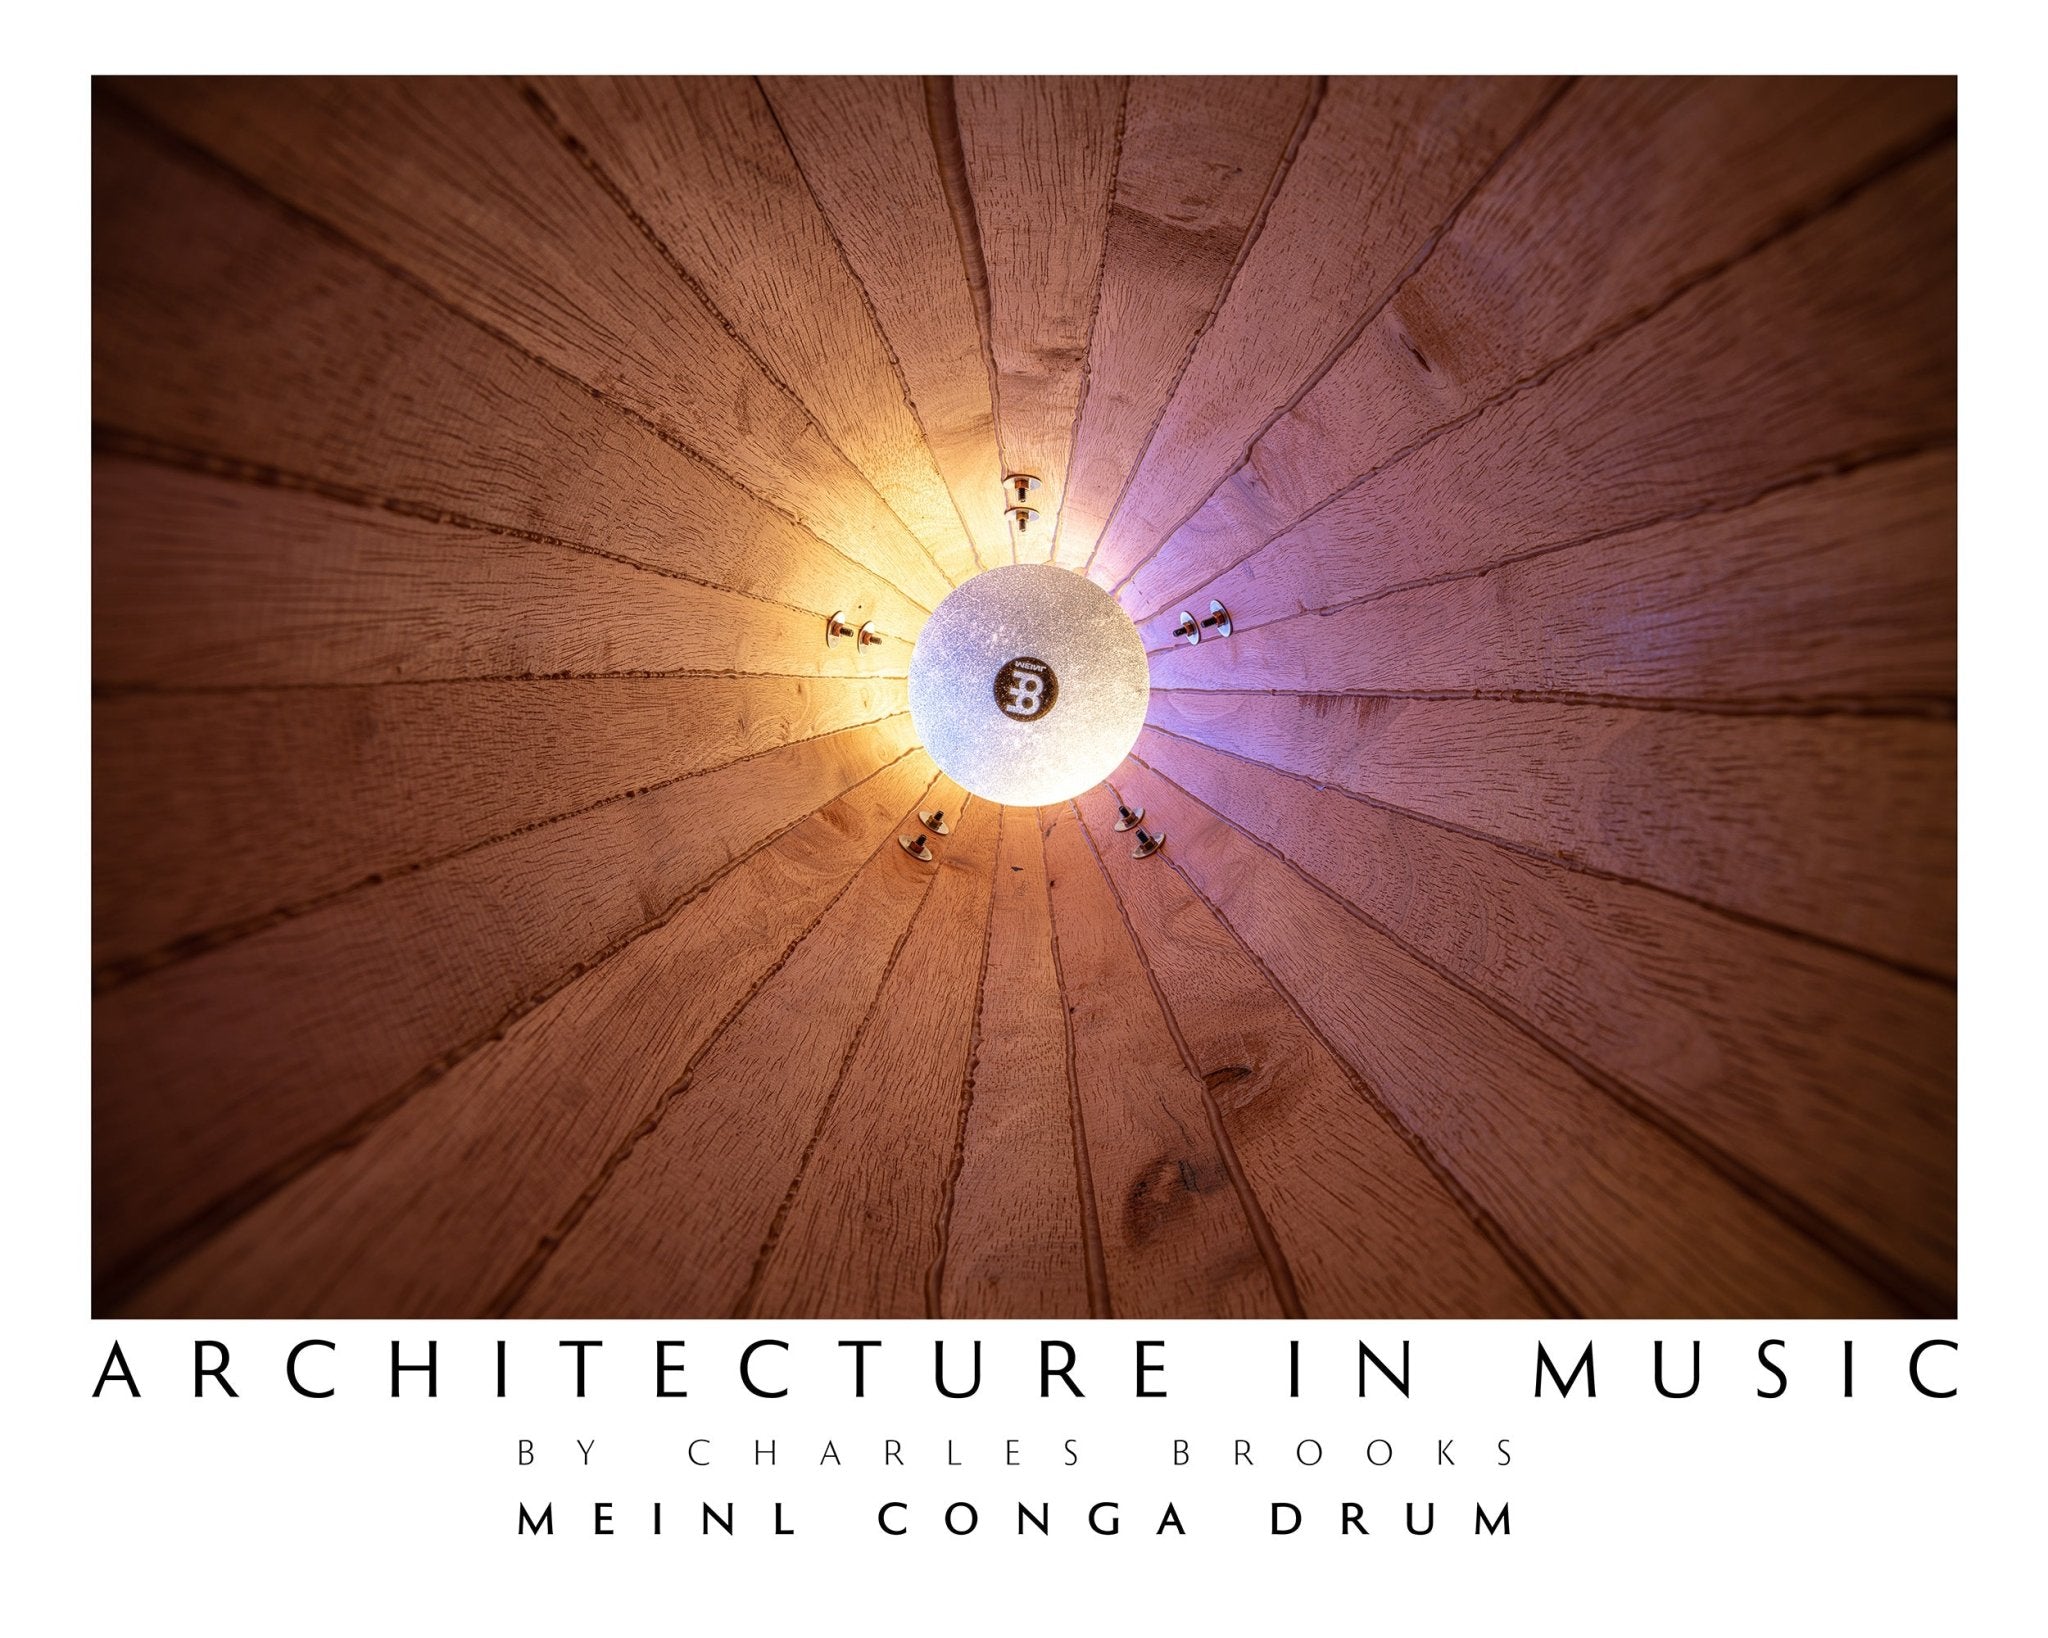 Photo of Meinl Conga Drum. High Quality Poster. - Giclée Poster Print - Architecture In Music